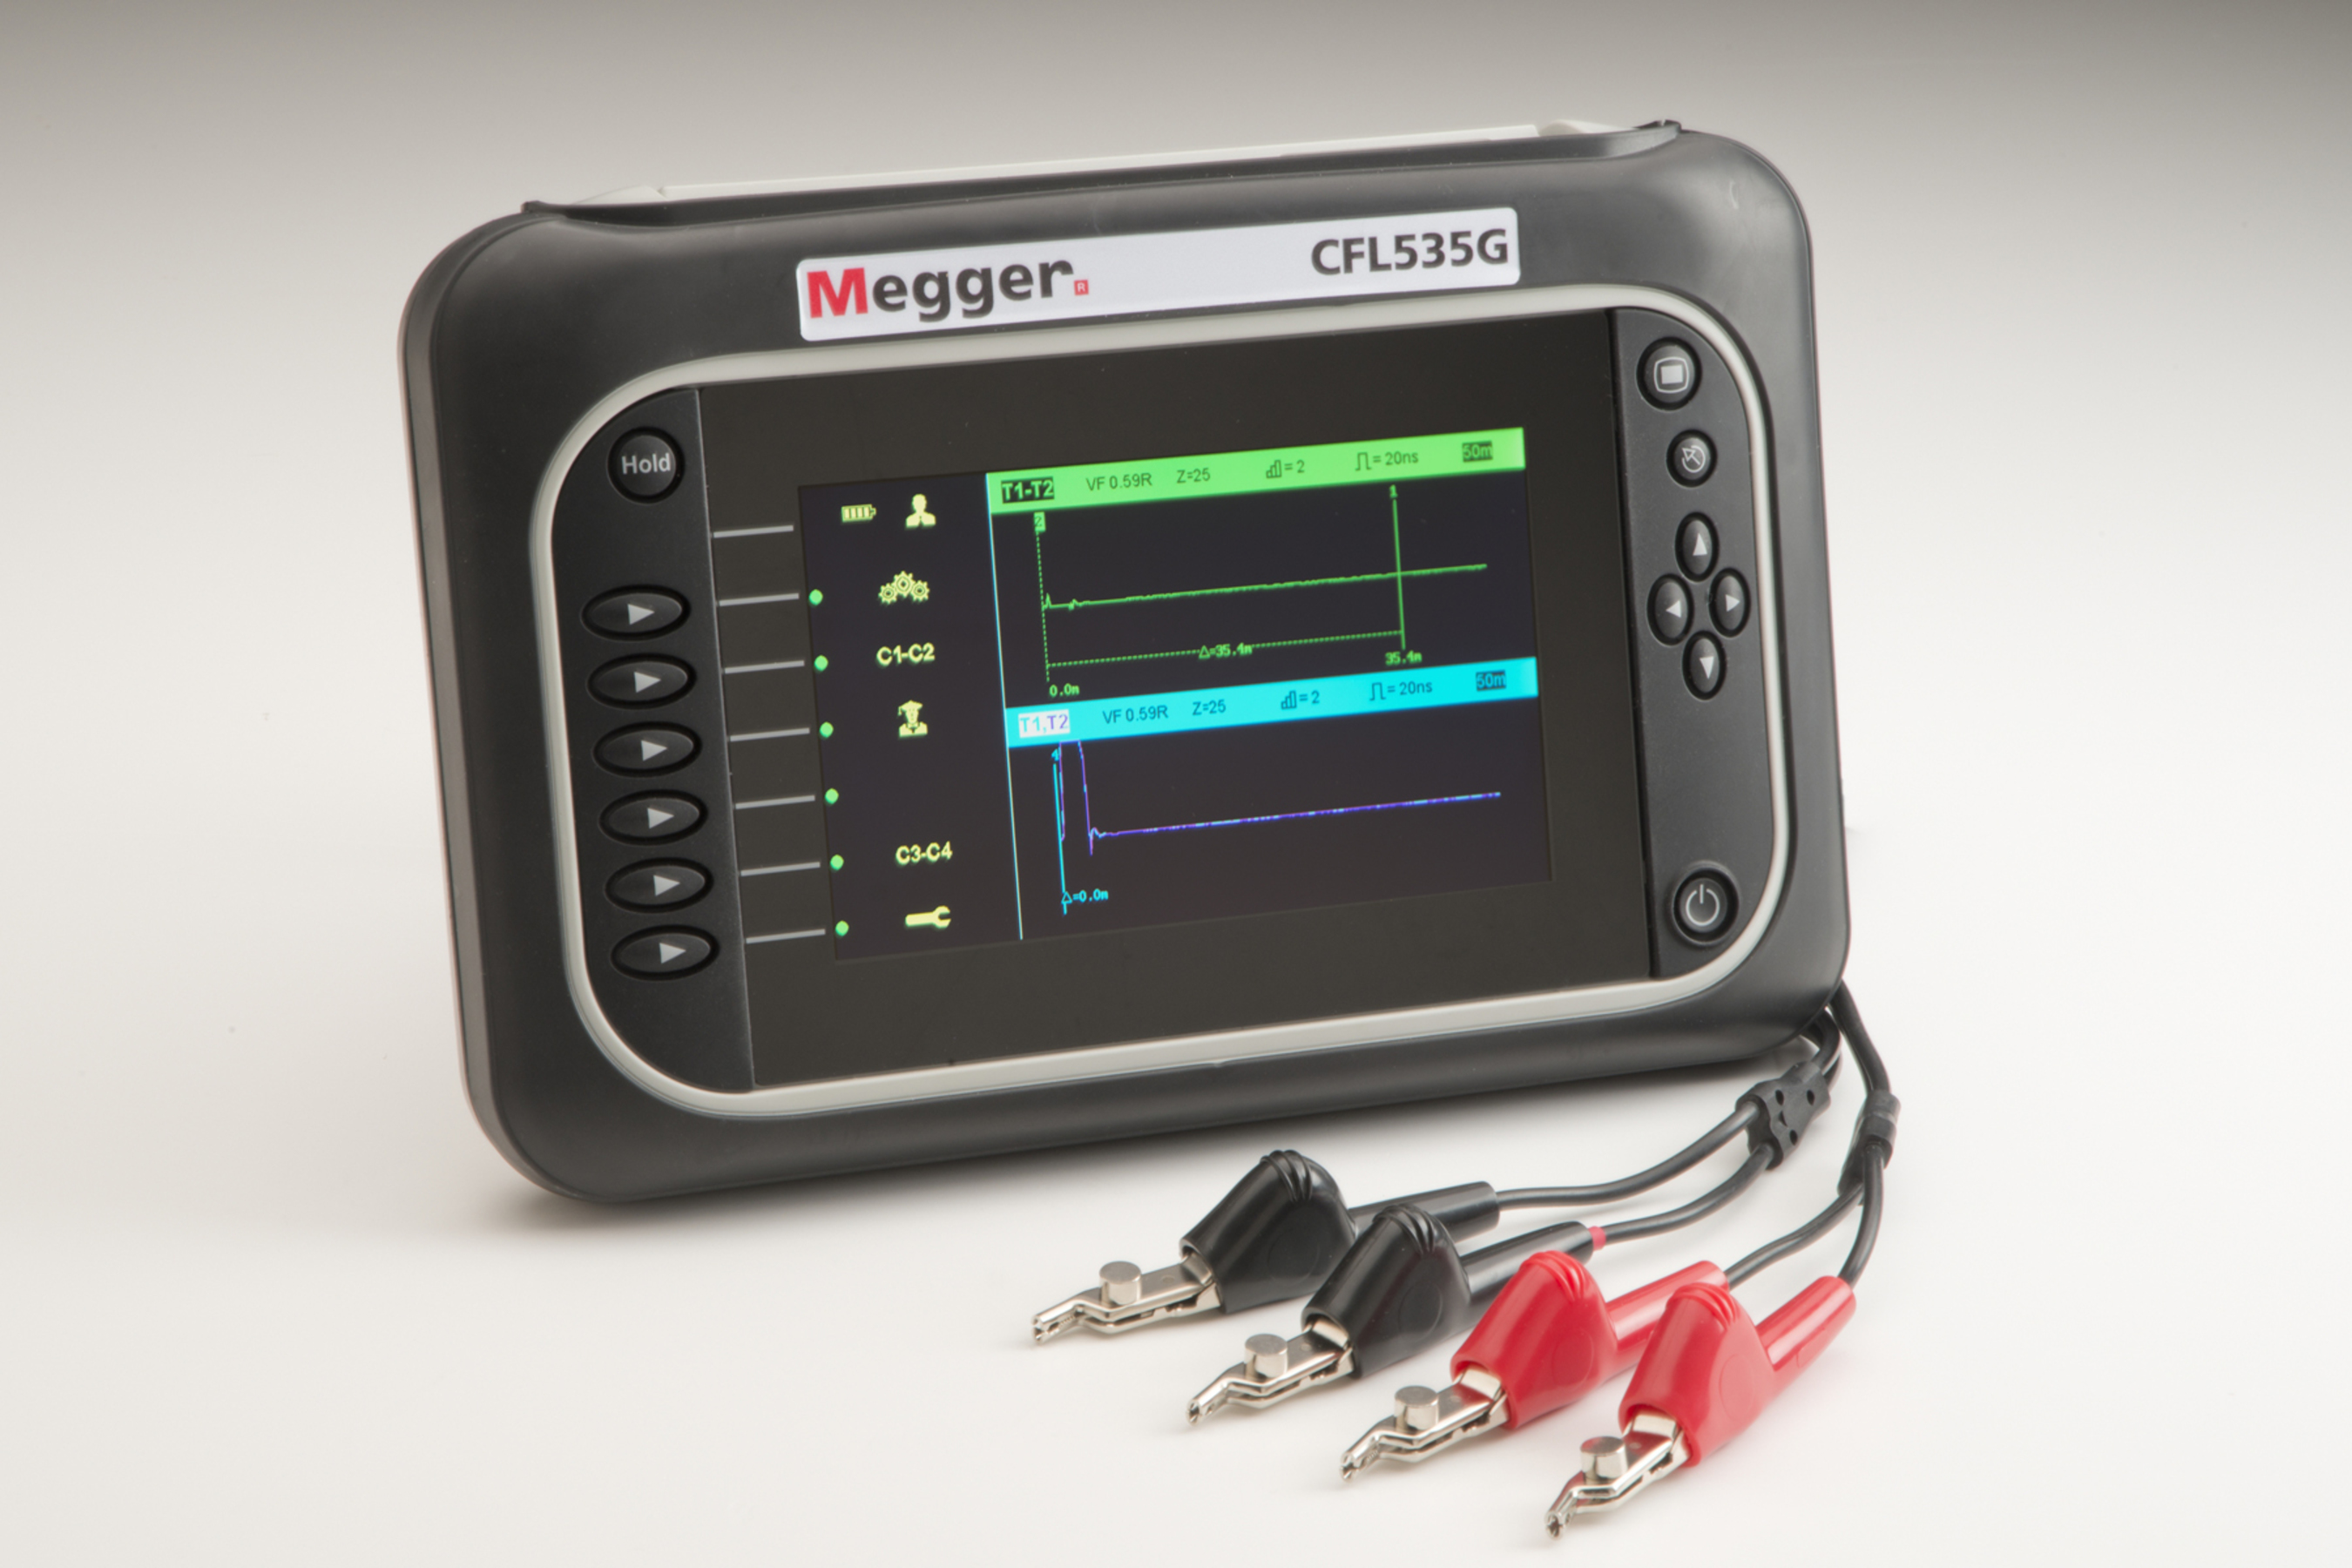 New Handheld TDR from Megger Locates Faults on Mixed Paired Metallic Cables (PRNewsFoto/Megger )